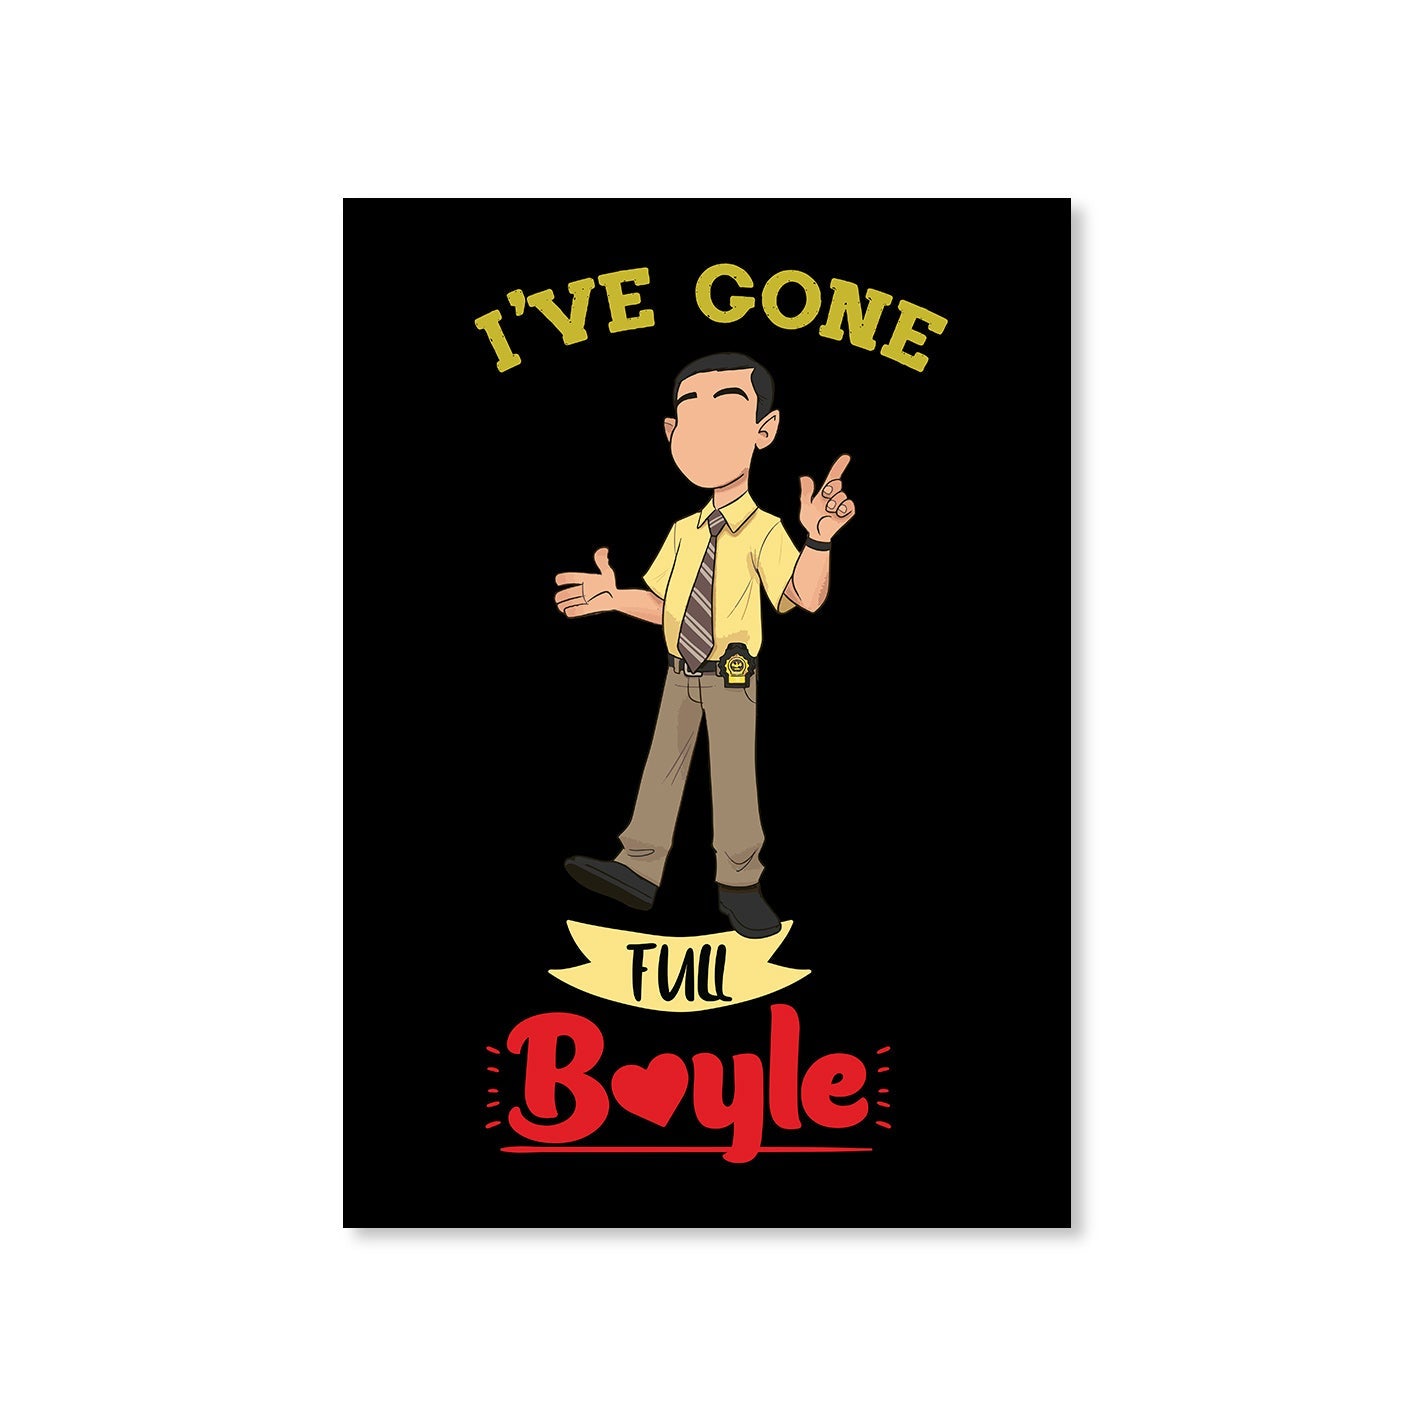 brooklyn nine-nine gone full boyle poster wall art buy online india the banyan tee tbt a4 detective jake peralta terry charles boyle gina linetti andy samberg merchandise clothing acceessories